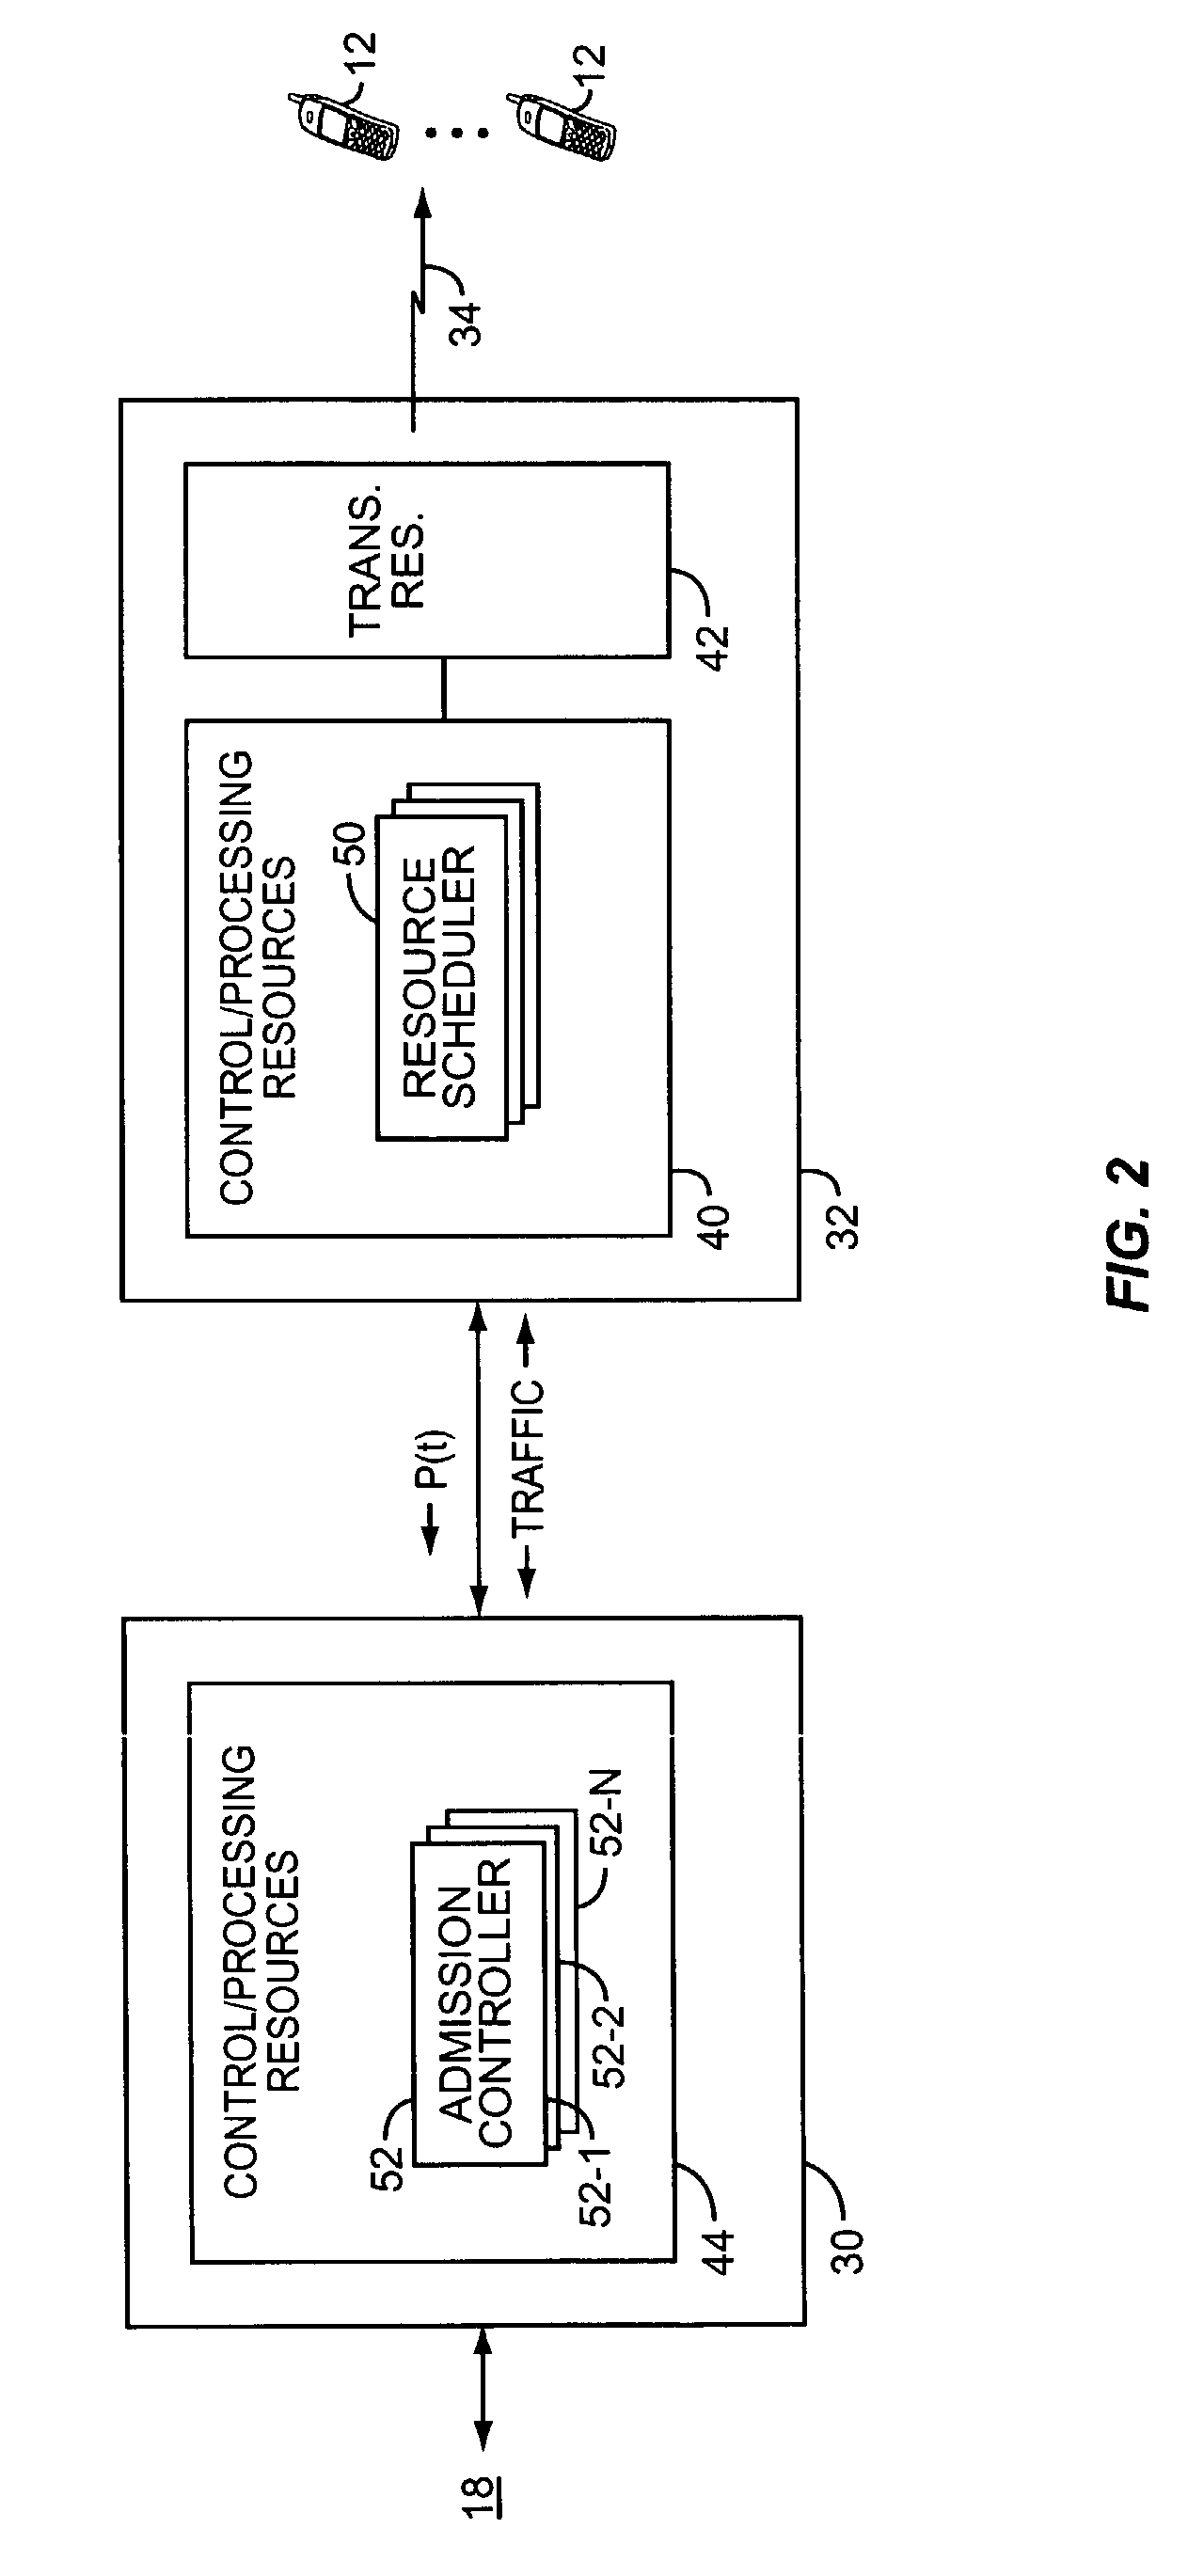 System and method for wireless network admission control based on quality of service